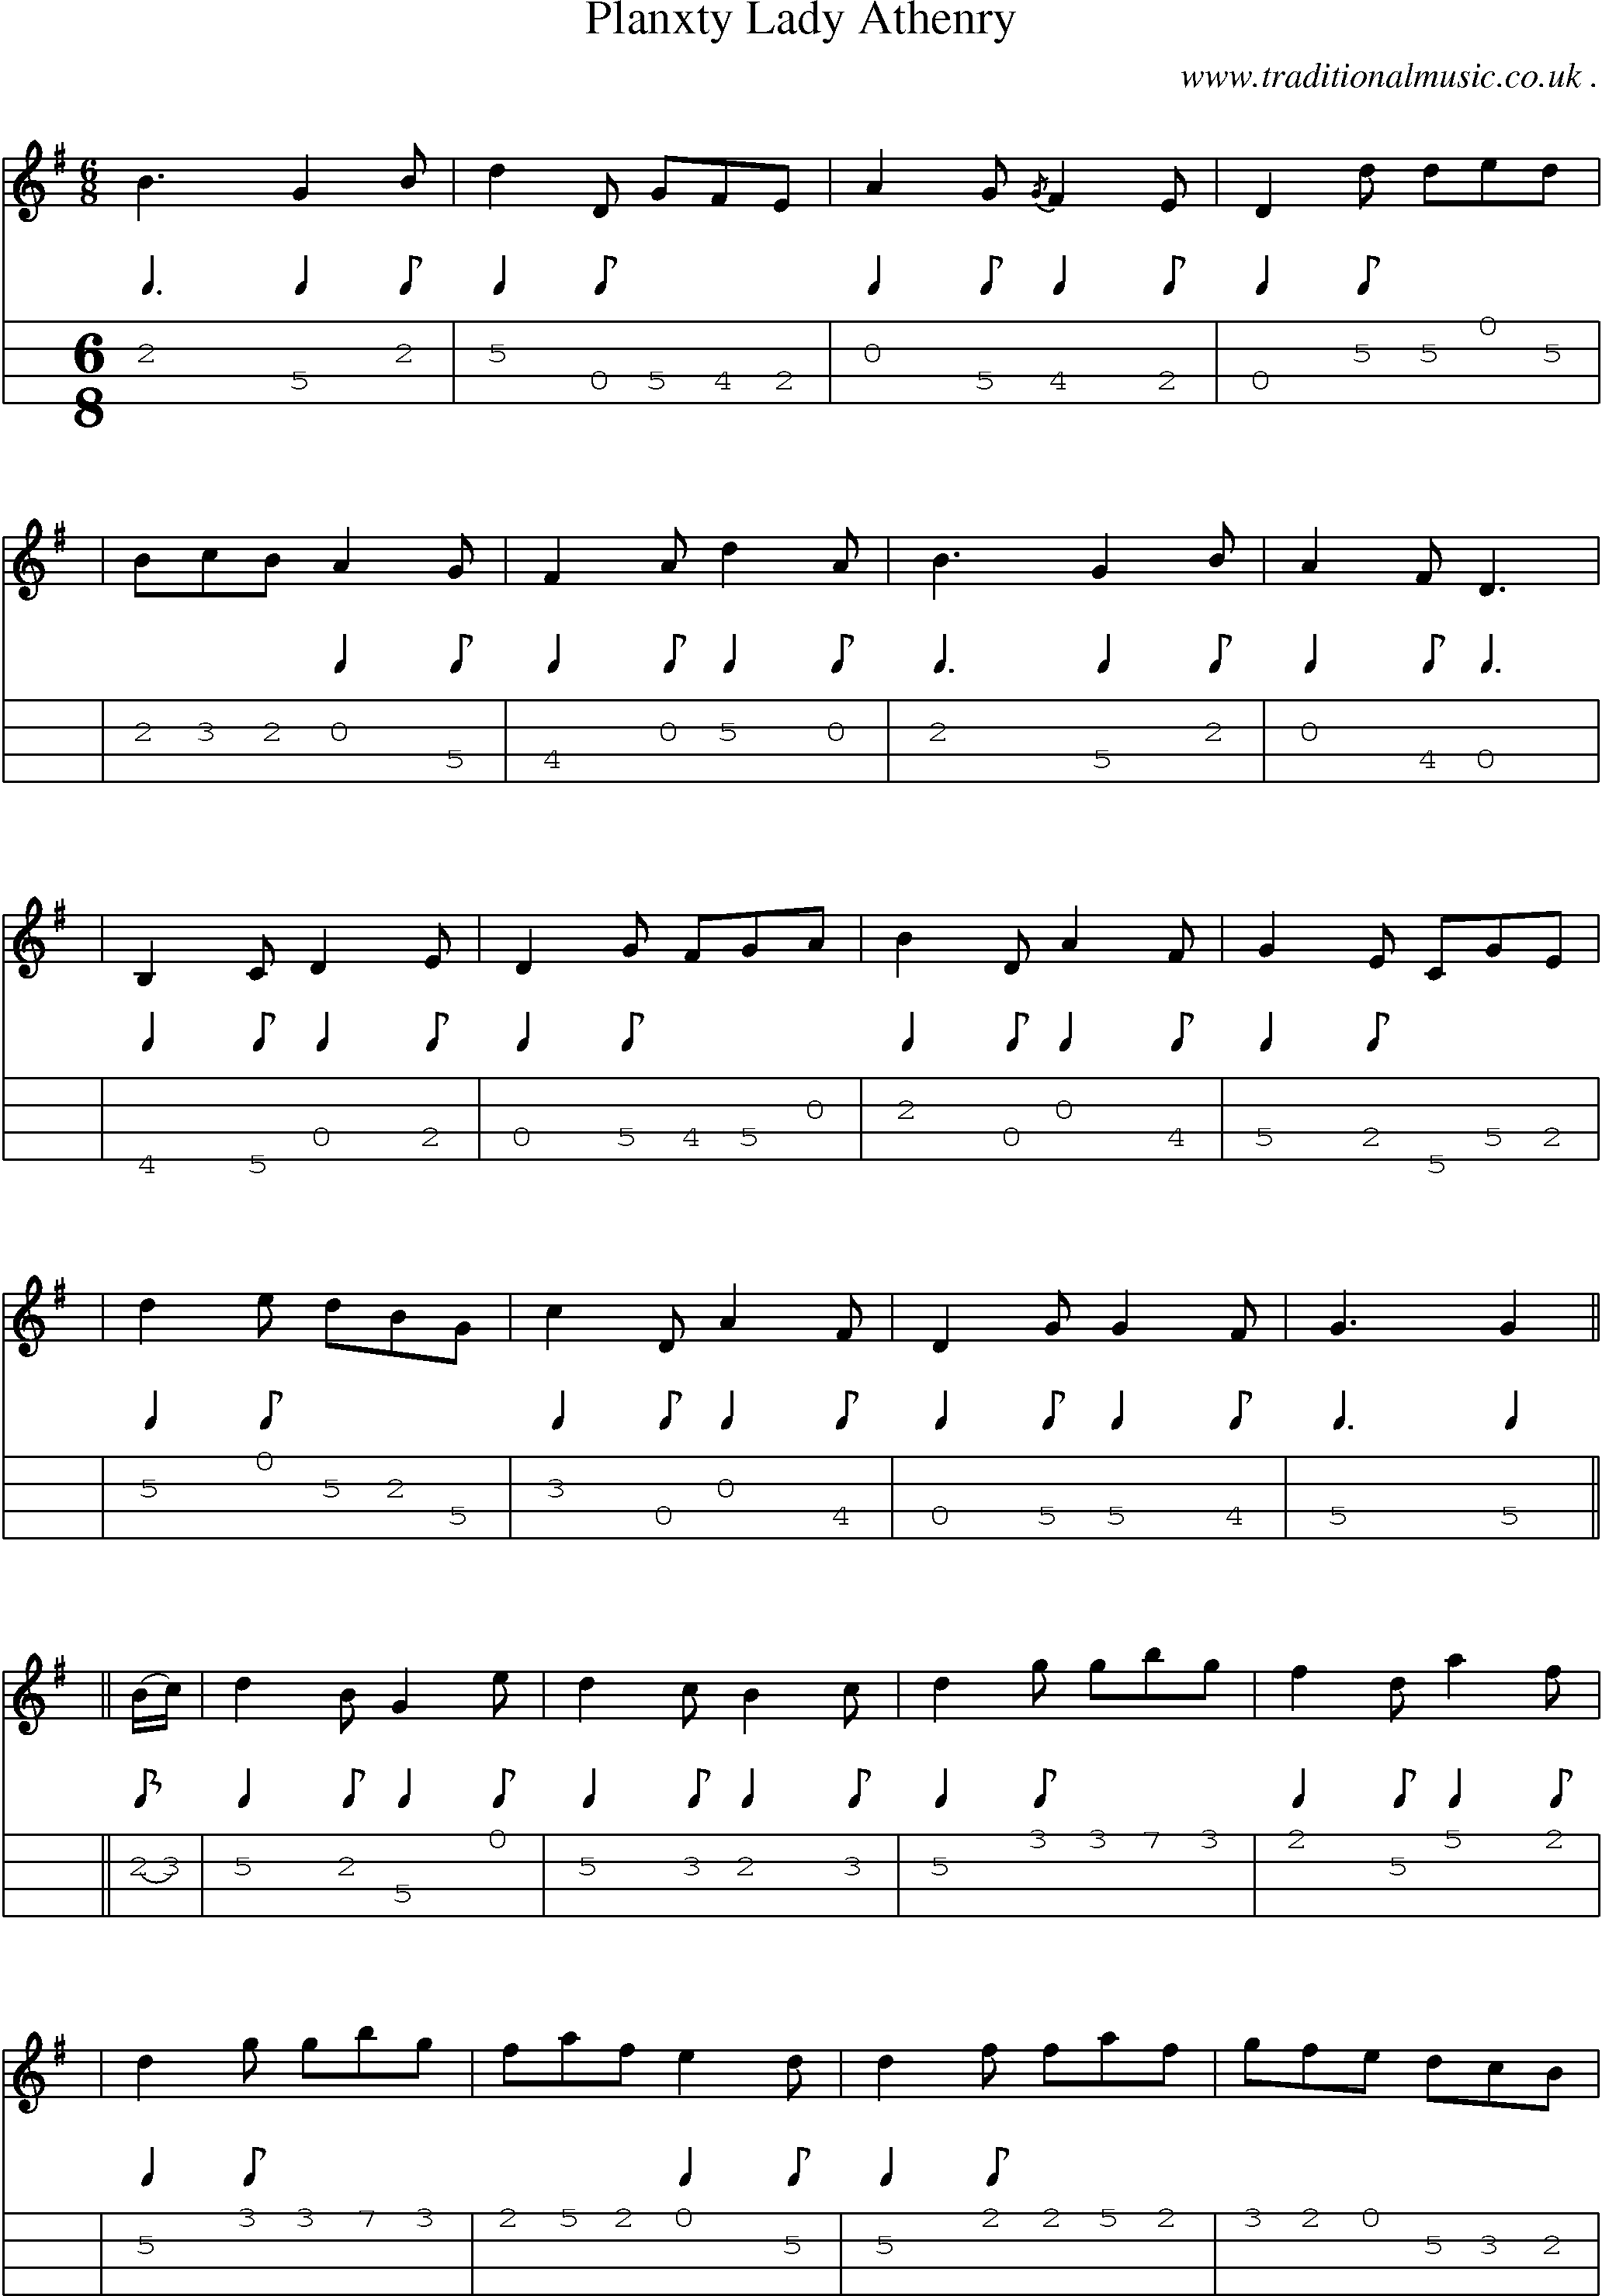 Sheet-music  score, Chords and Mandolin Tabs for Planxty Lady Athenry